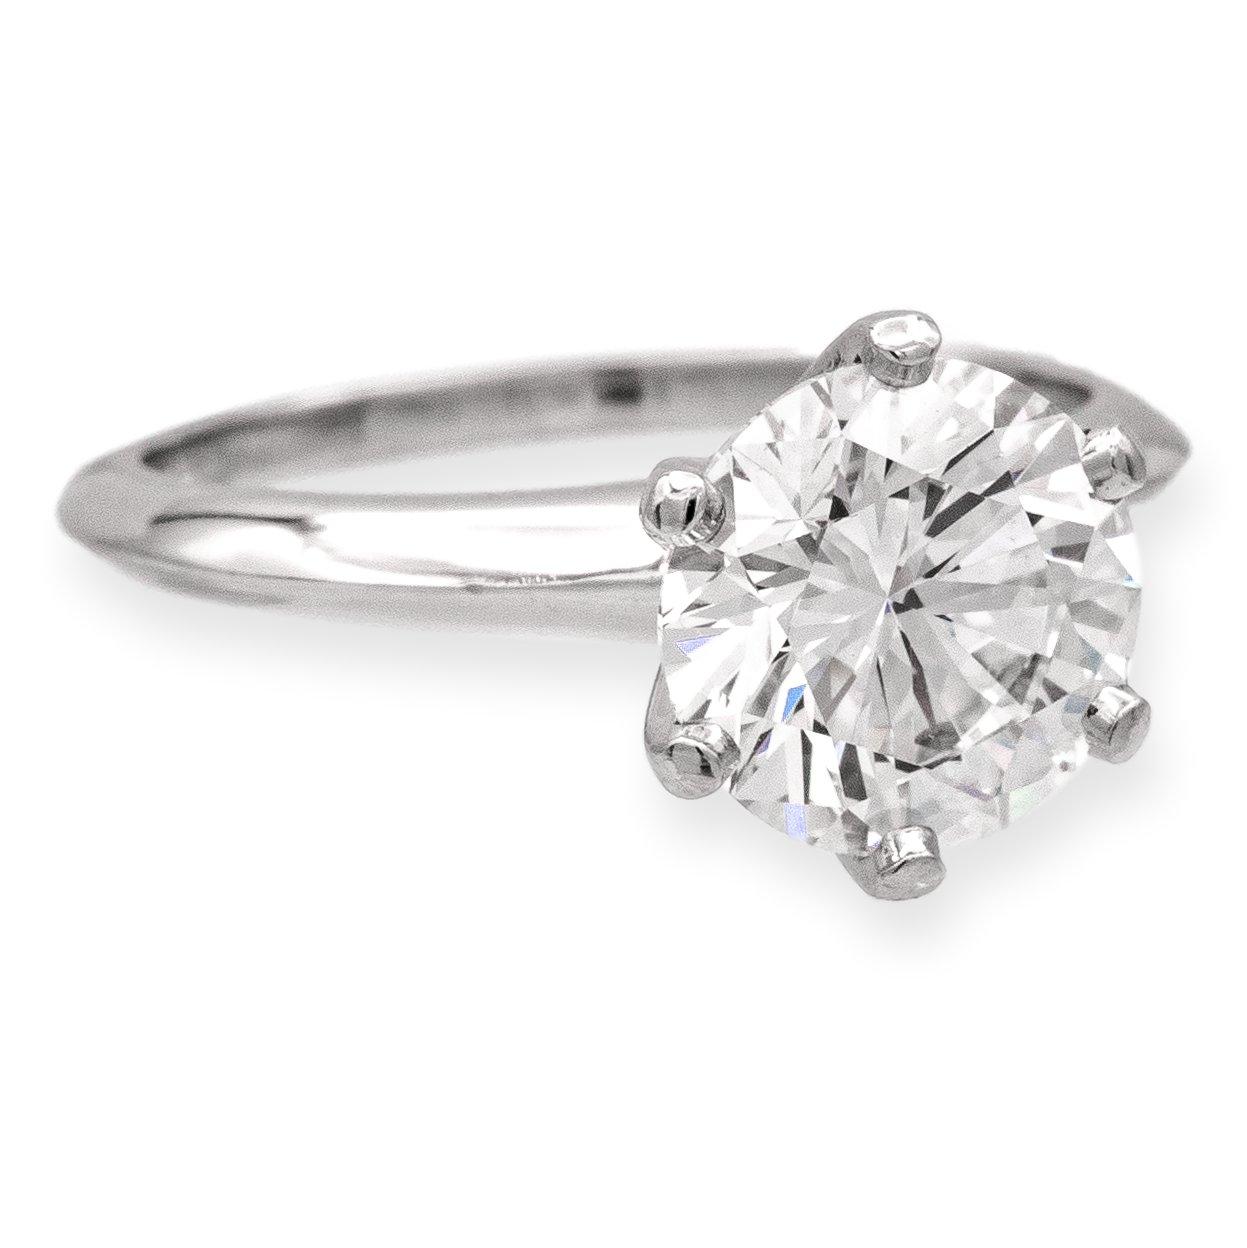 Tiffany & Co Platinum Solitaire Engagement Ring is a timeless and elegant piece that symbolizes love and commitment. The ring is finely crafted with a six-prong platinum mounting, showcasing the 2.54-carat round brilliant cut diamond at the center.